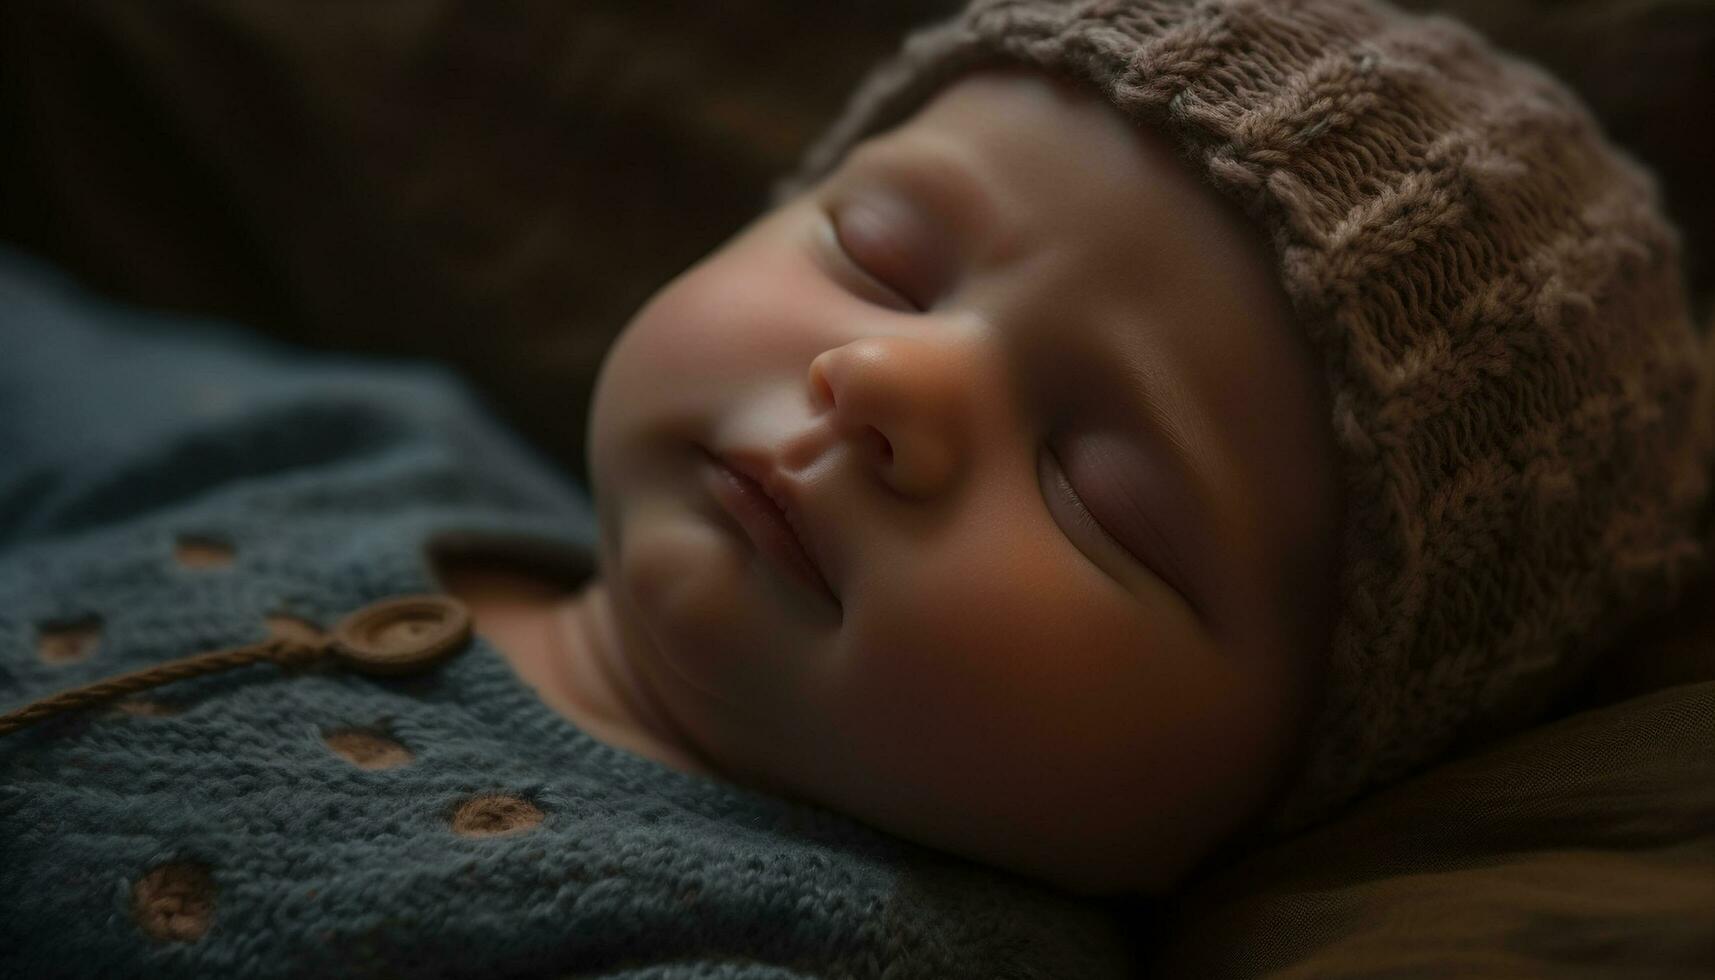 Cute newborn boy sleeping peacefully wrapped in soft knit blanket generated by AI photo